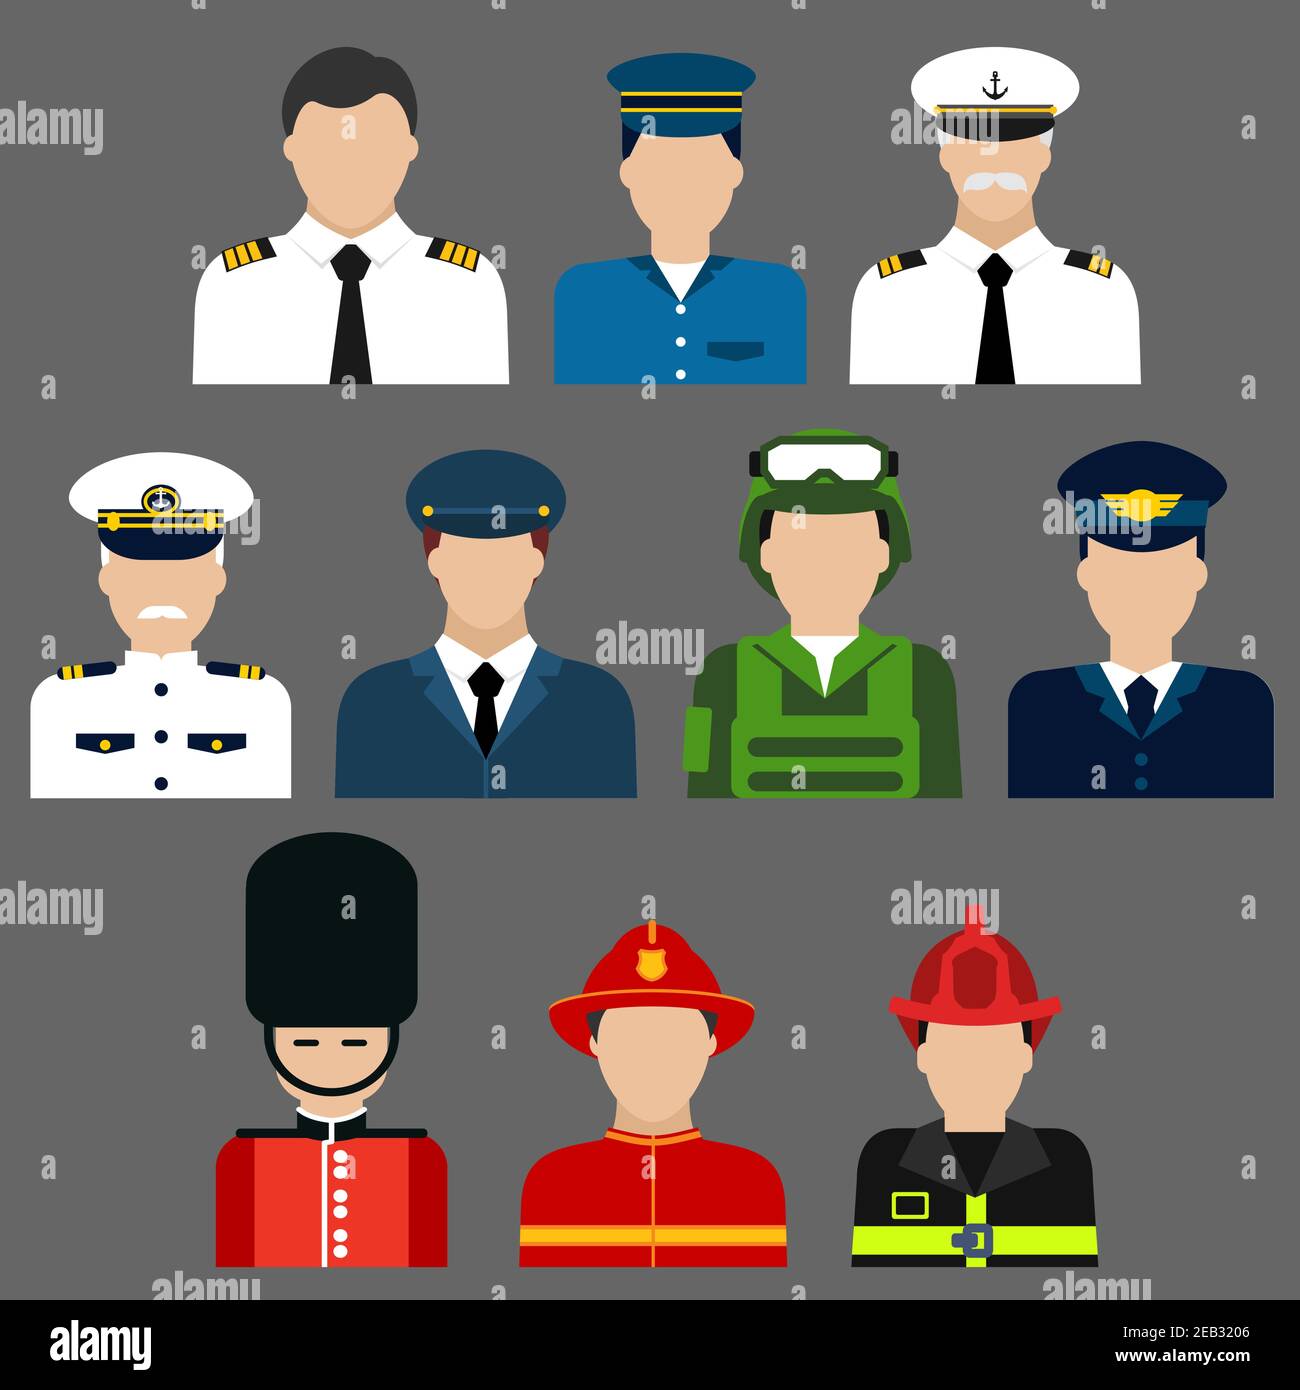 Flat icons of professions avatars of firefighter, soldier, pilot , security and ship captain with men in professional uniform and caps Stock Vector